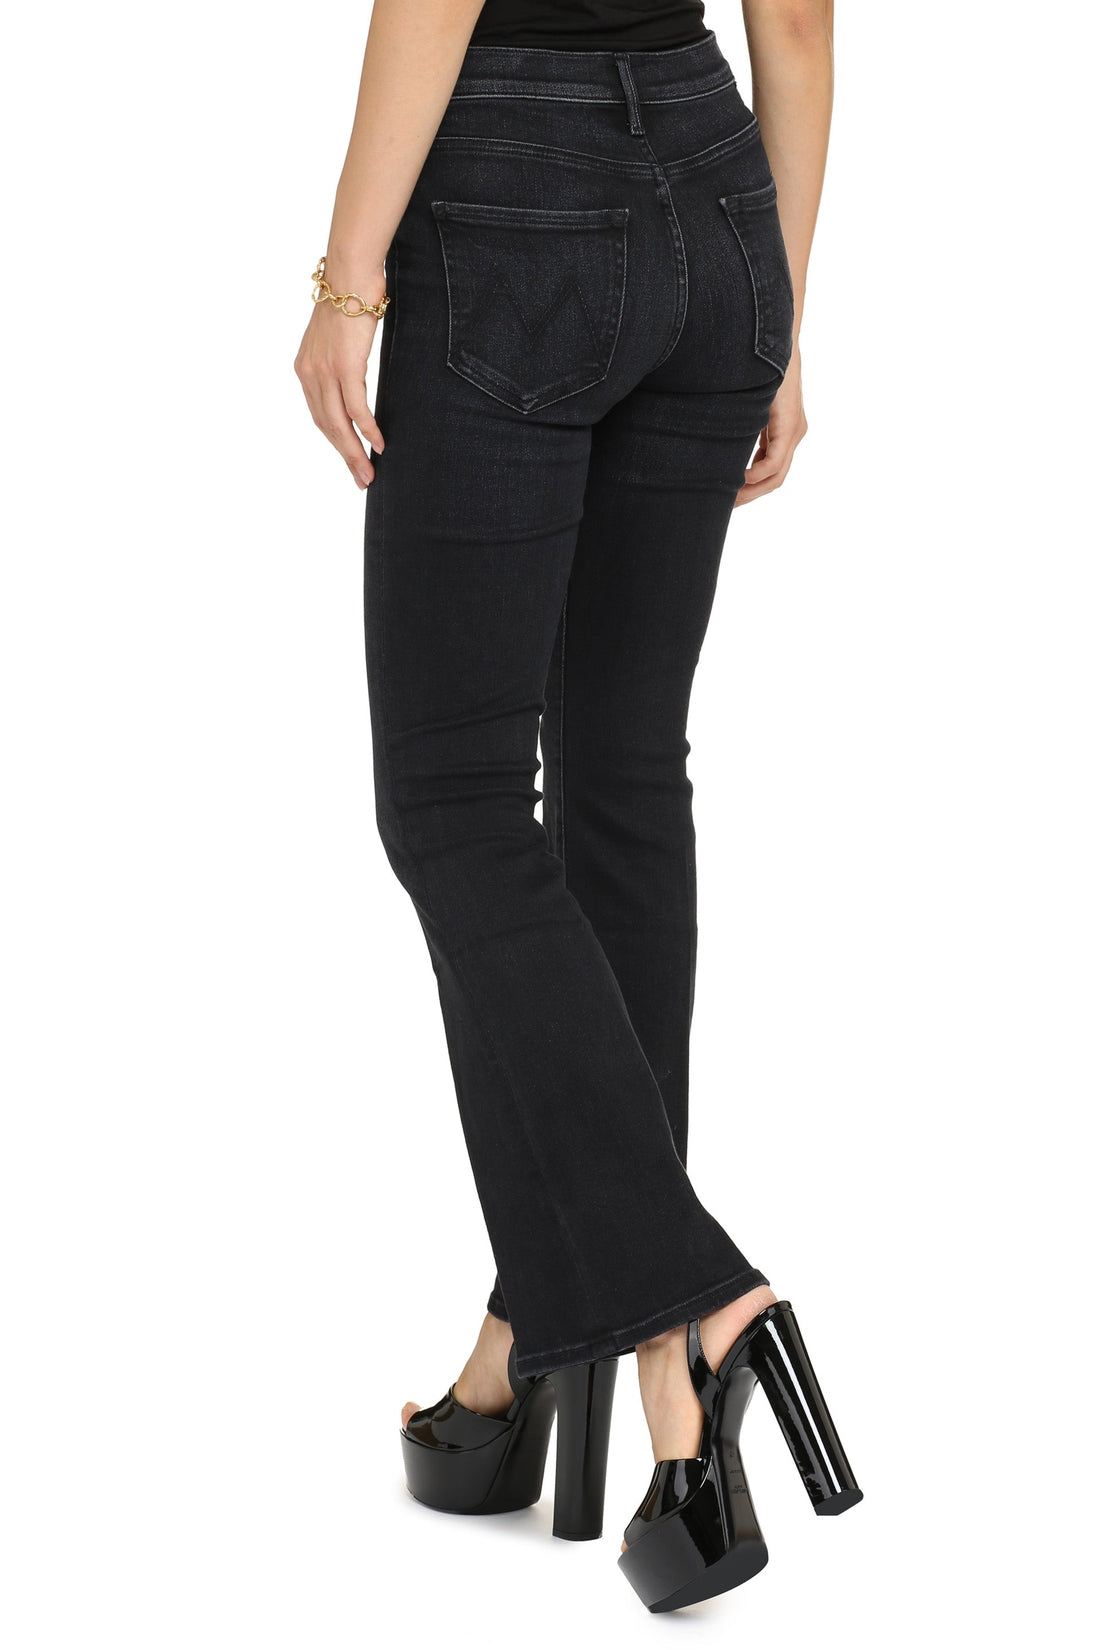 Mother-OUTLET-SALE-The Weekender Stretch jeans-ARCHIVIST